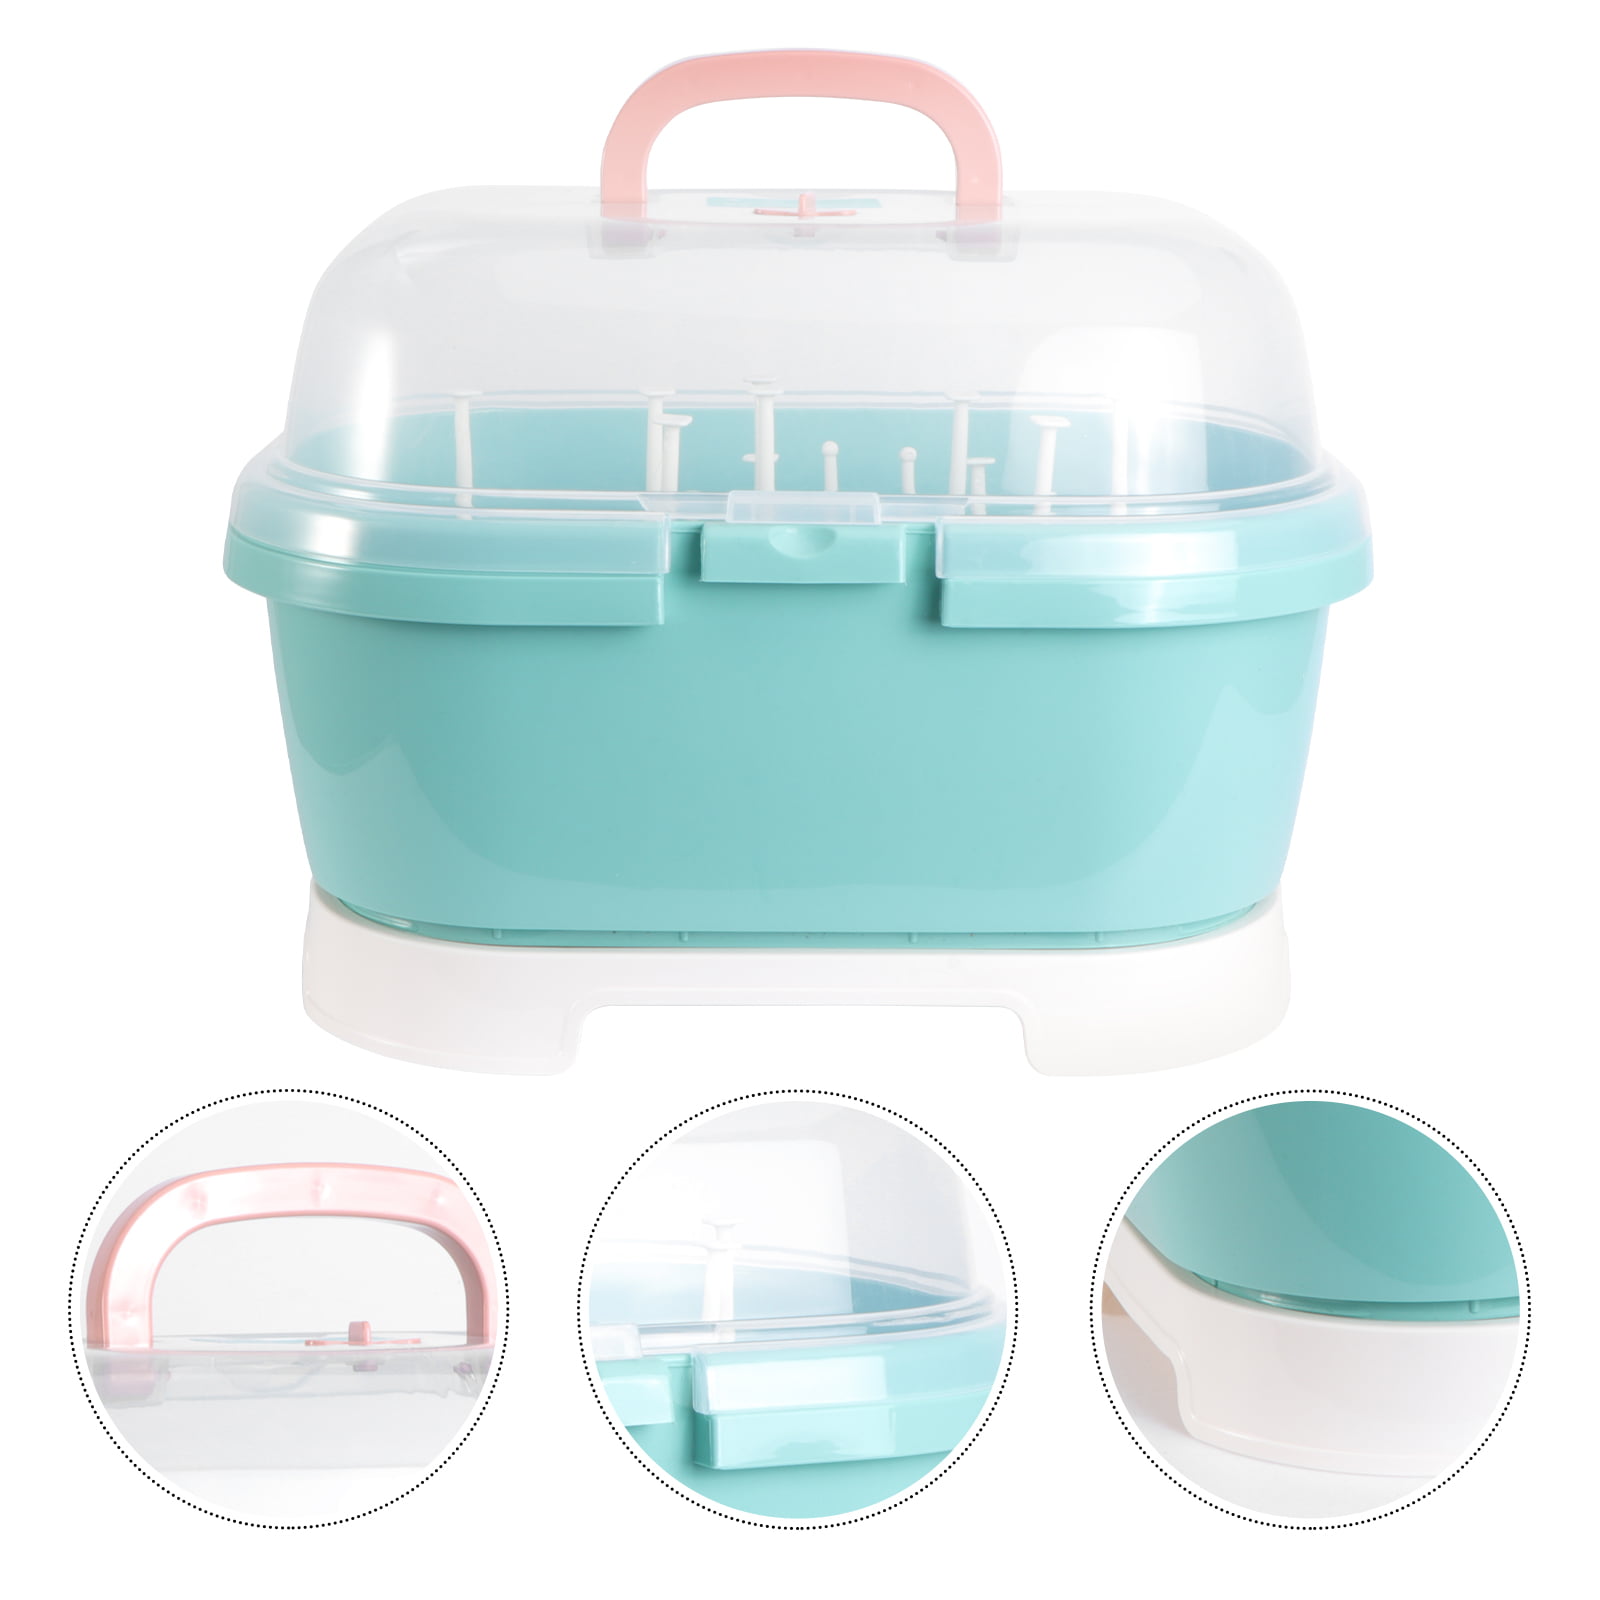 Agyvvt Baby Bottle Drying Rack with Anti-Dust Cover Portable Nursing Bottle  Storage Box Dinnerware Organizer for Home Kitchen Use